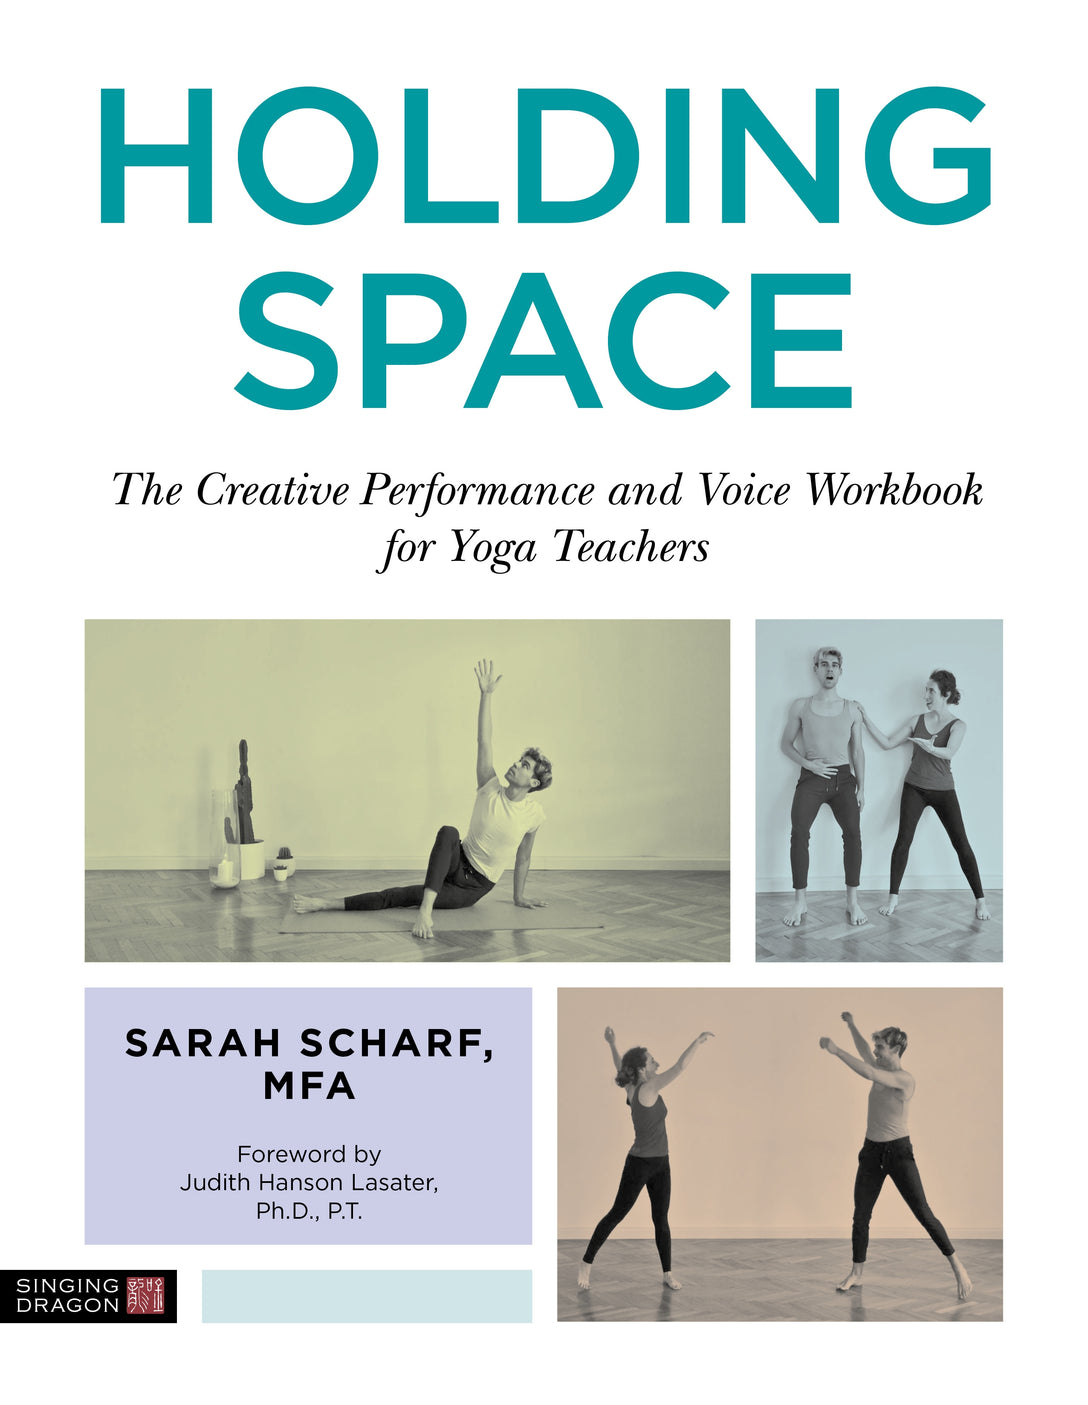 Holding Space by Judith Hanson Lasater, Sarah Scharf